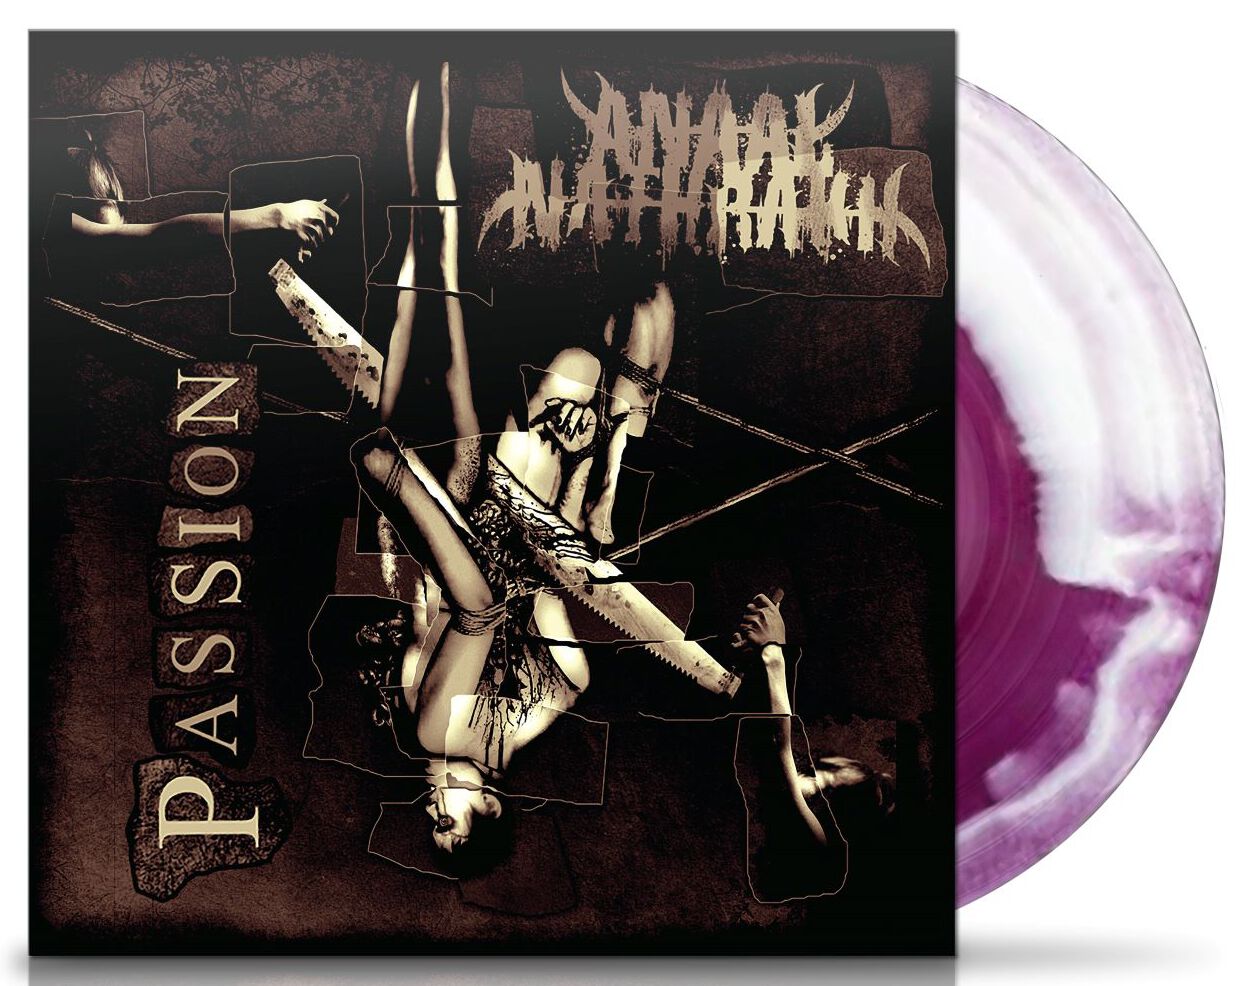 Image of Anaal Nathrakh Passion LP farbig